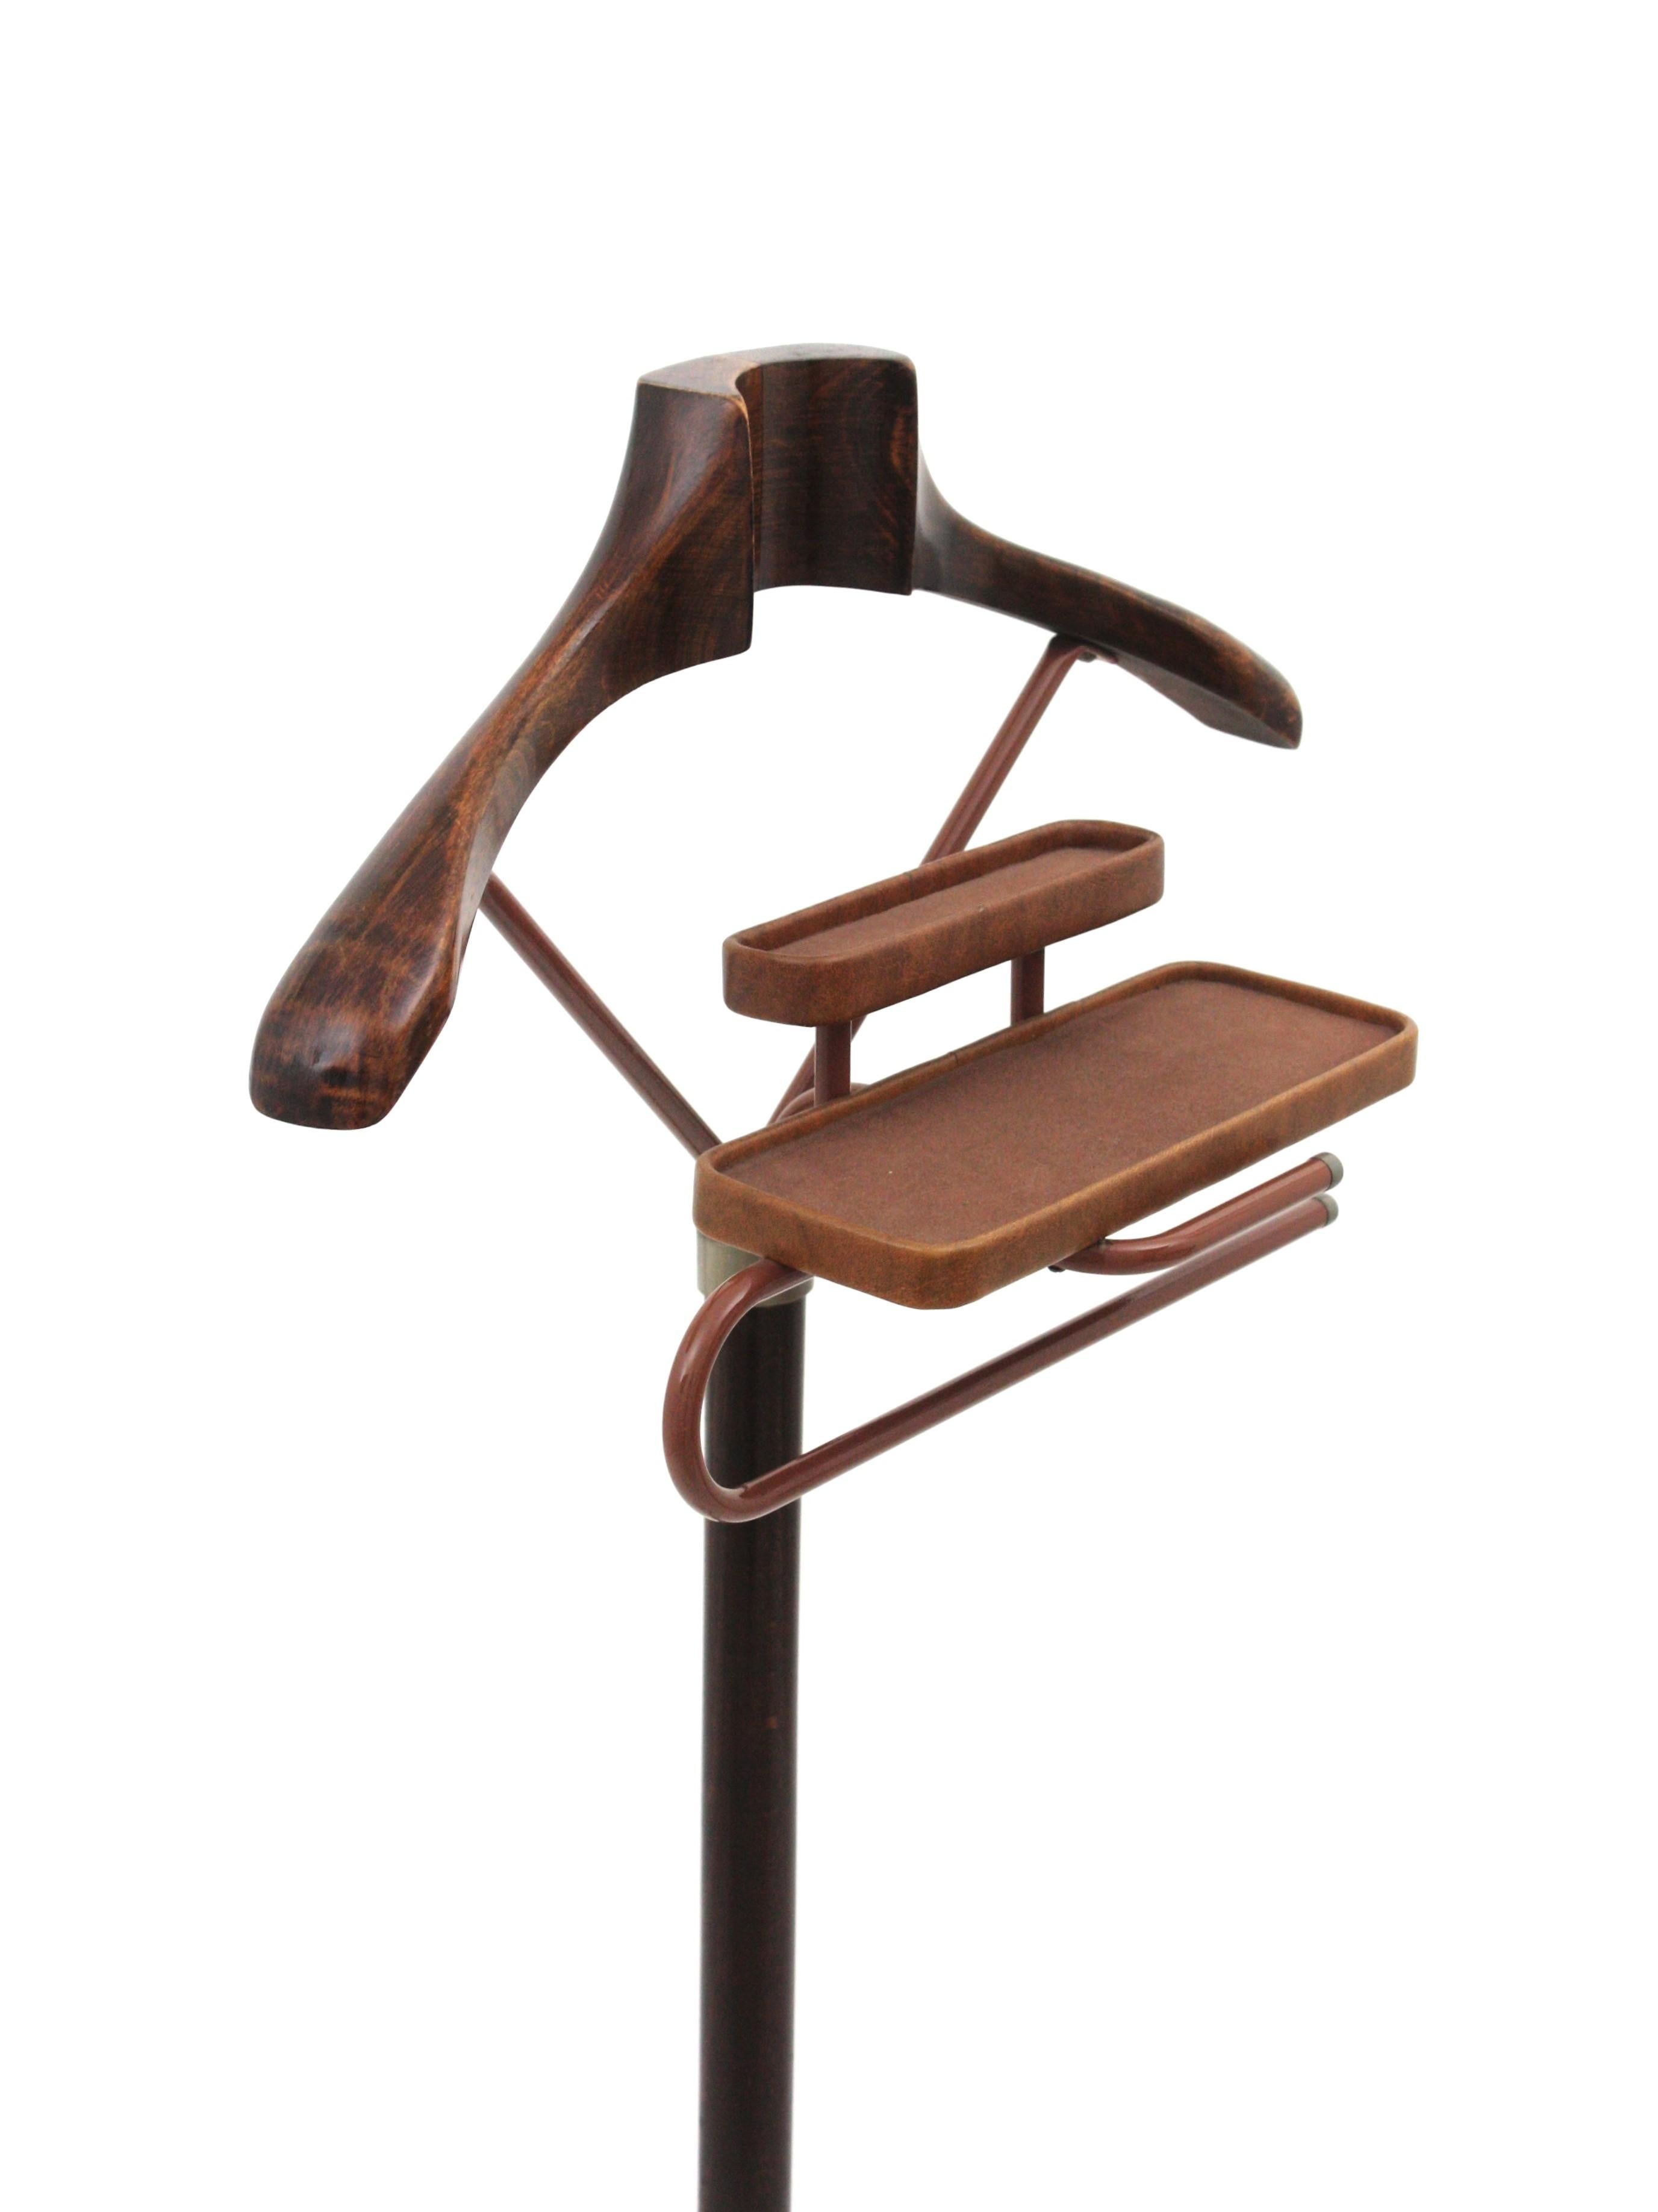 Italian Beech Wood and Acrylic Valet Stand Dressboy, 1960s For Sale 1